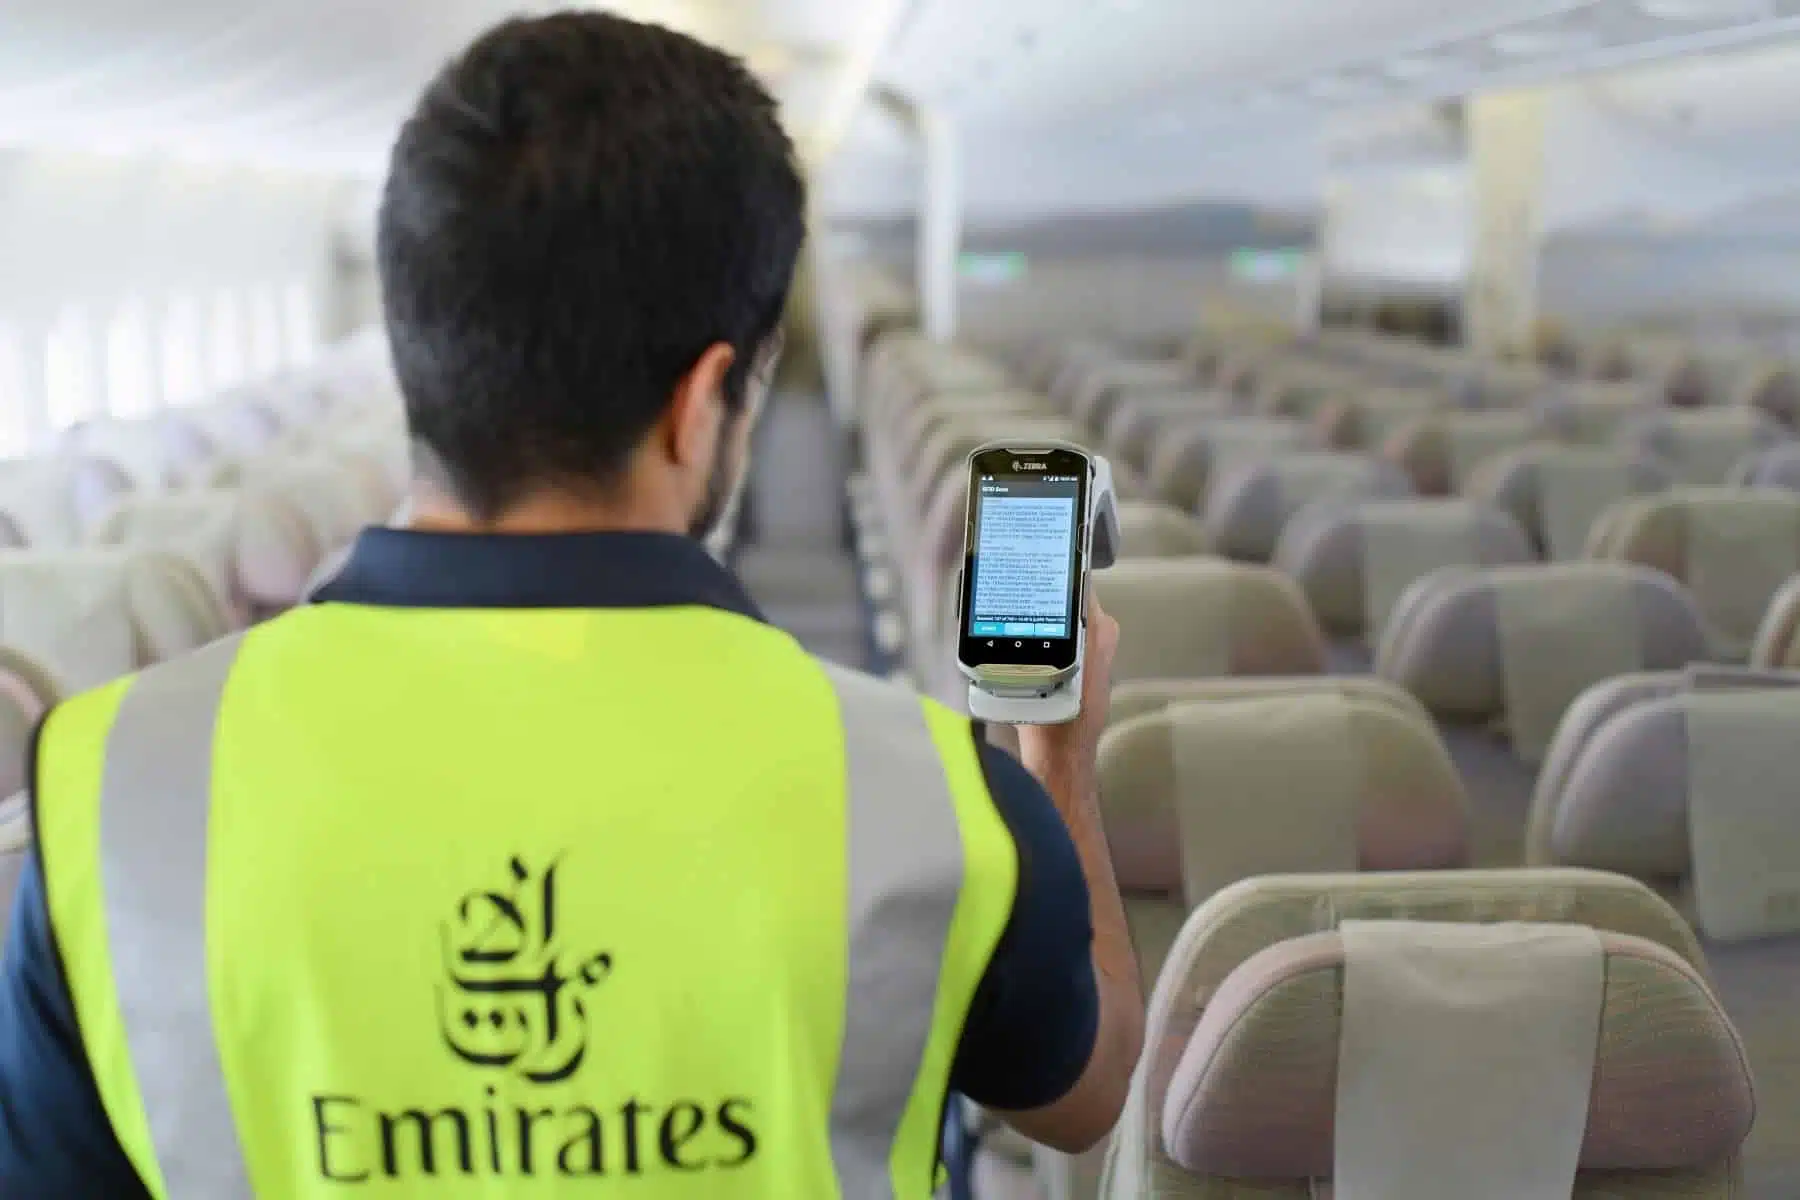 Emirates completes the largest number of RFID scans for inflight emergency equipment on a daily basis